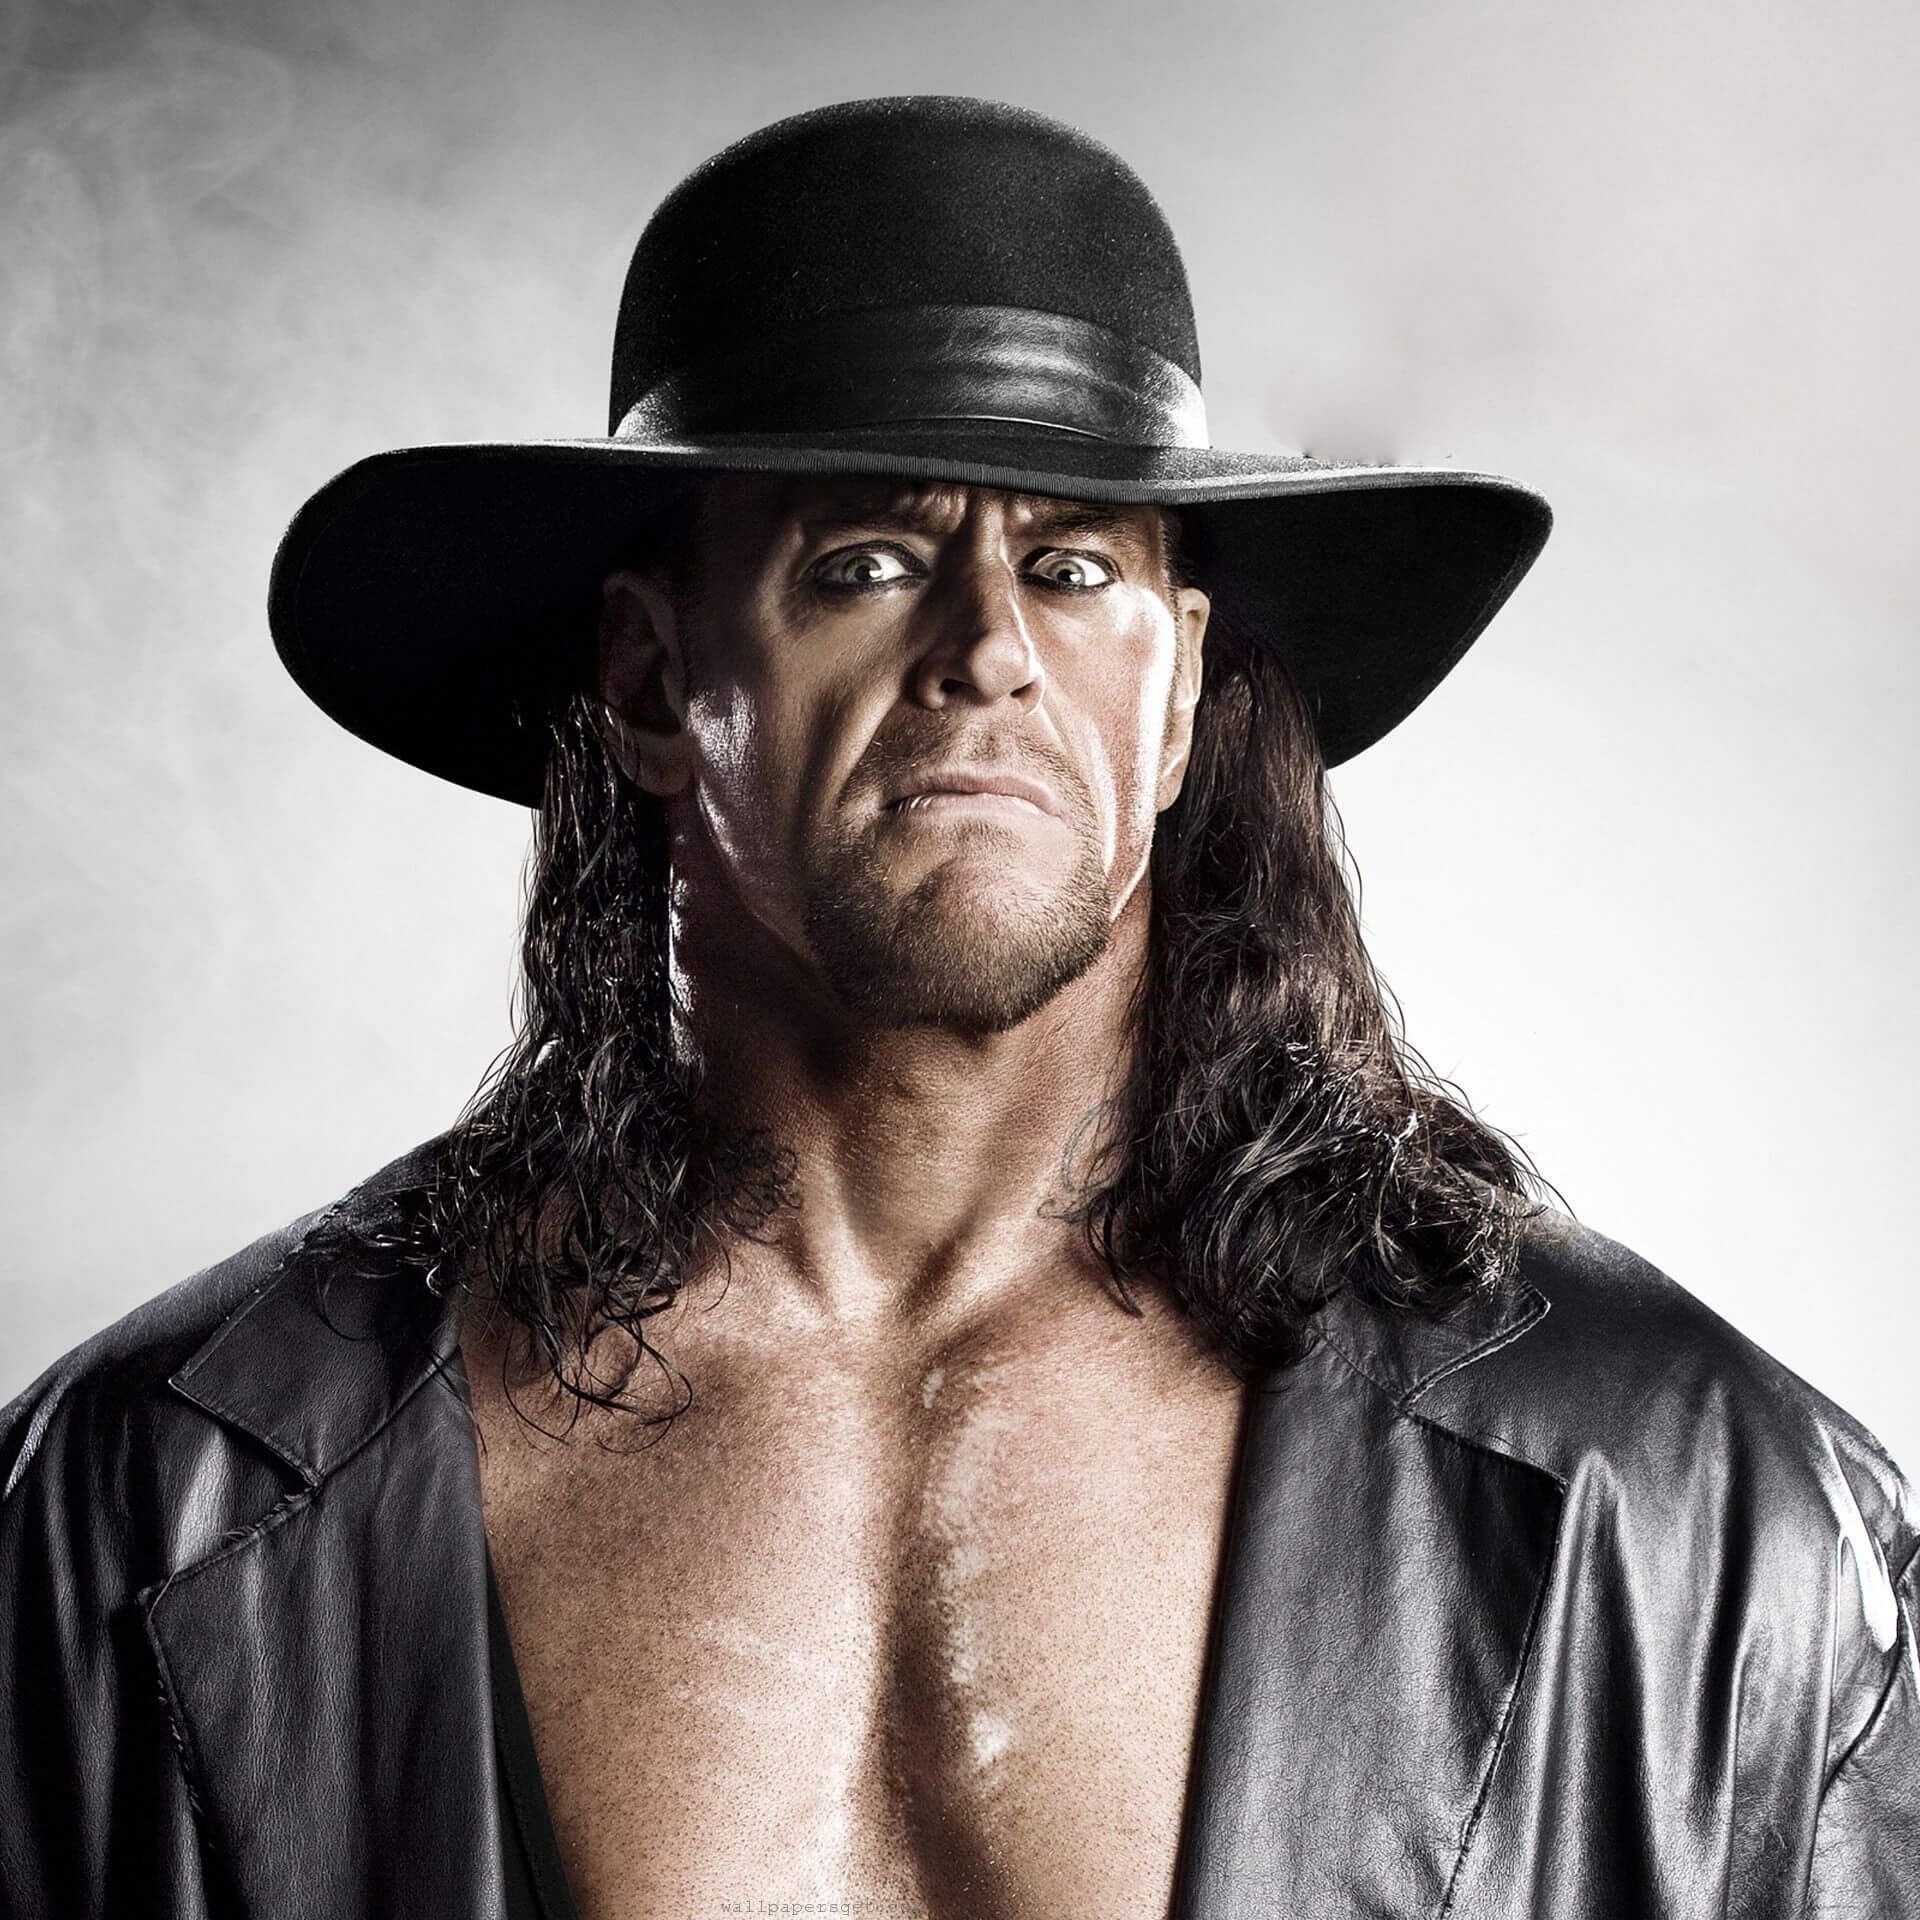 The Undertaker William Calaway popularity & fame